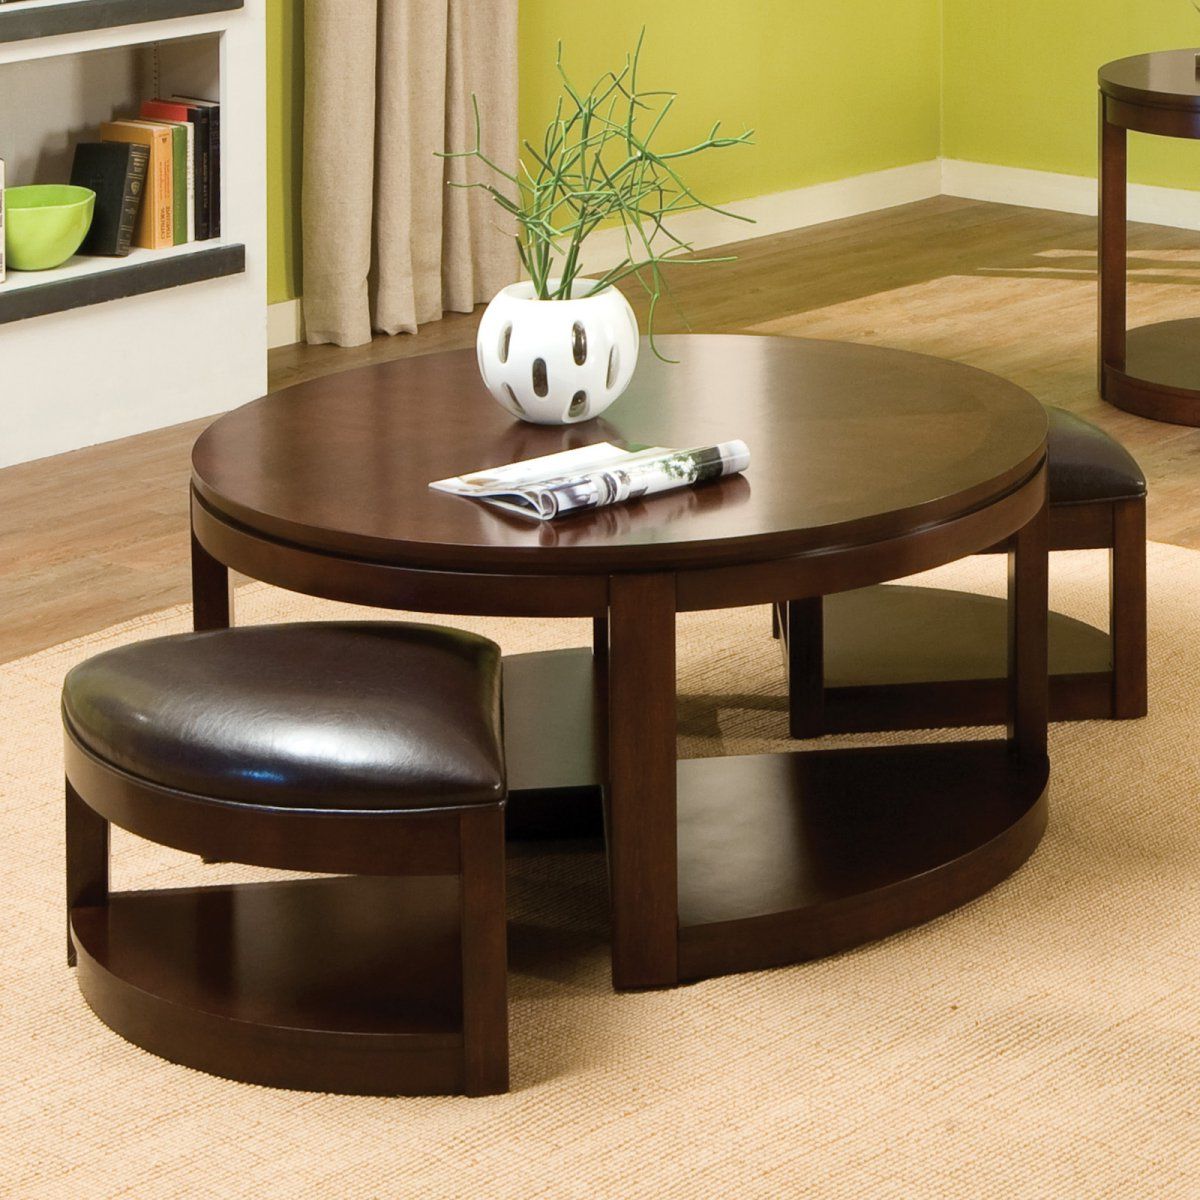 Recent The Round Coffee Tables With Storage – The Simple And Compact Furniture Regarding Round Coffee Tables With Storage (View 6 of 15)